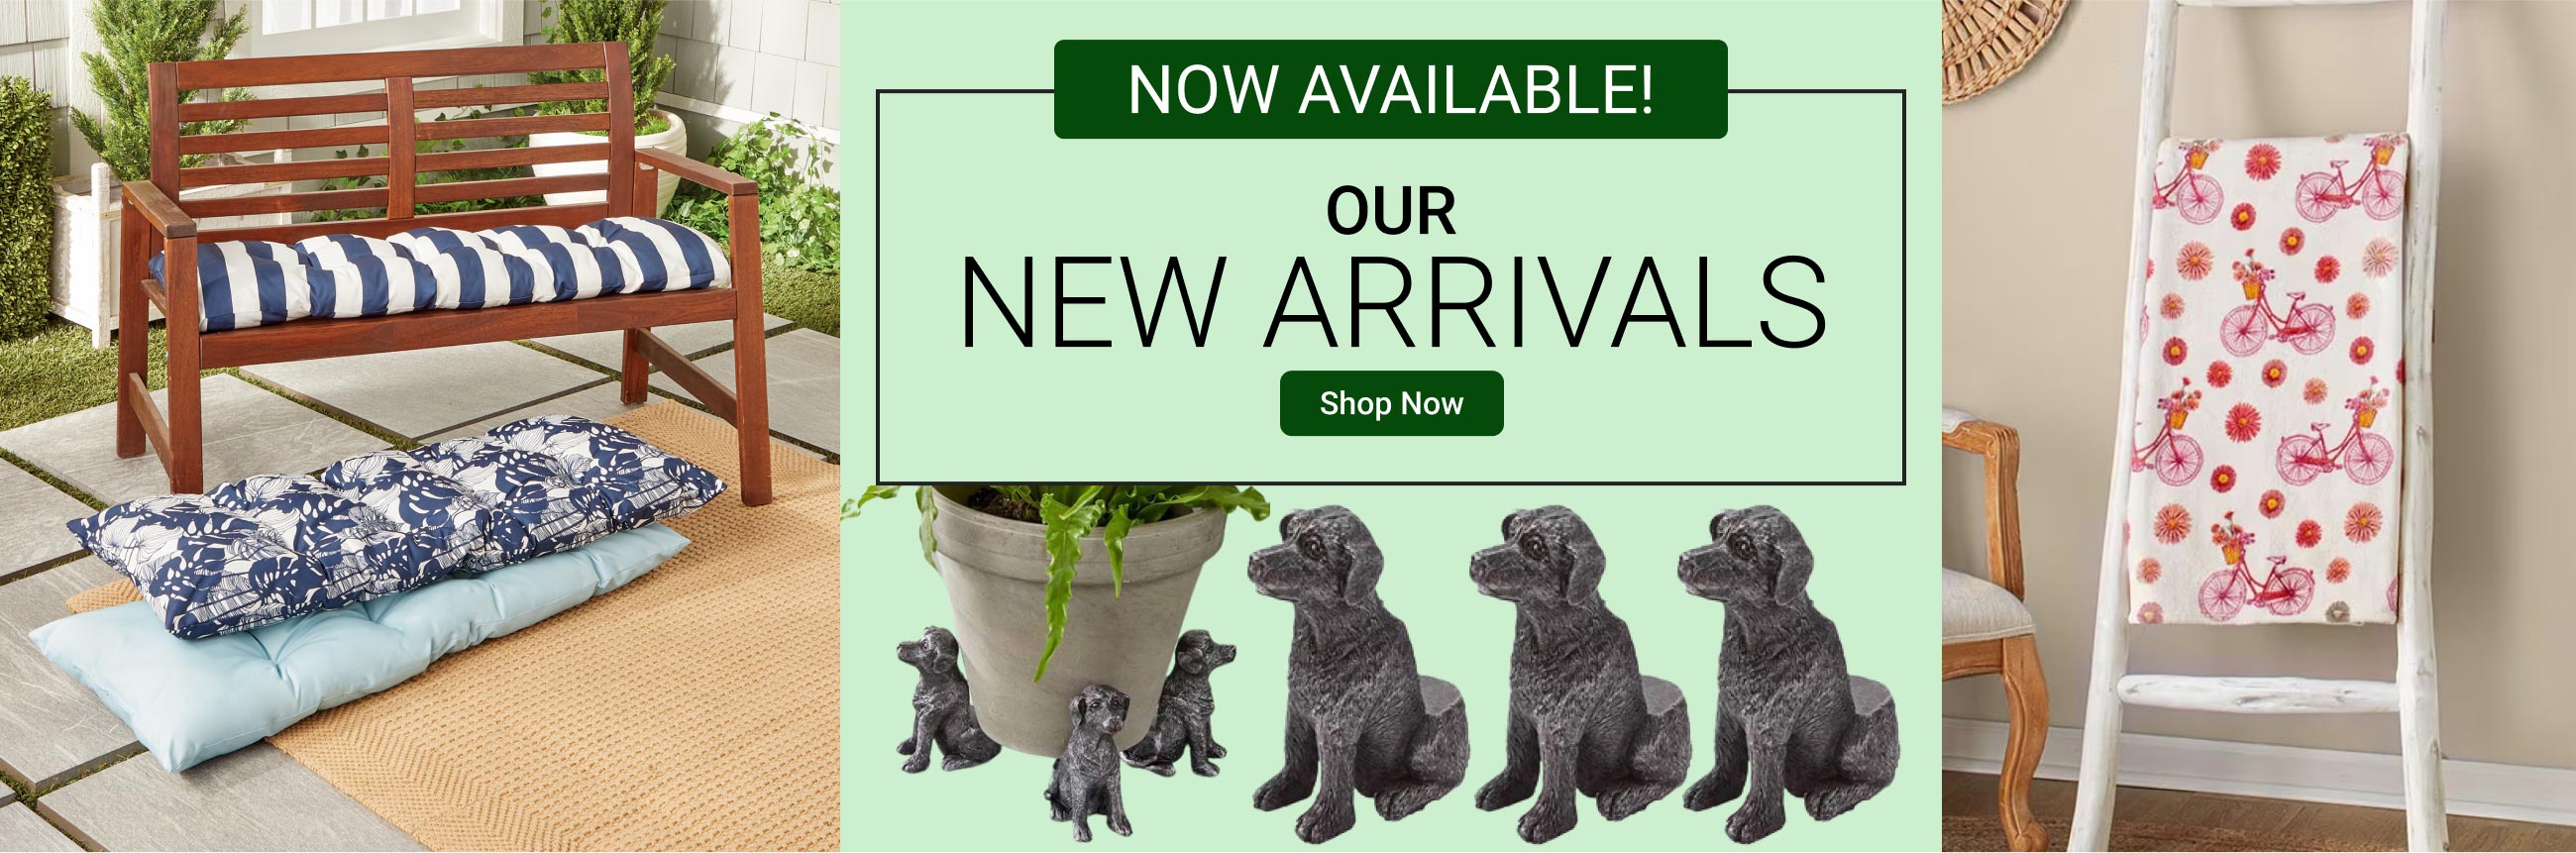 New arrivals now available! - Shop Now